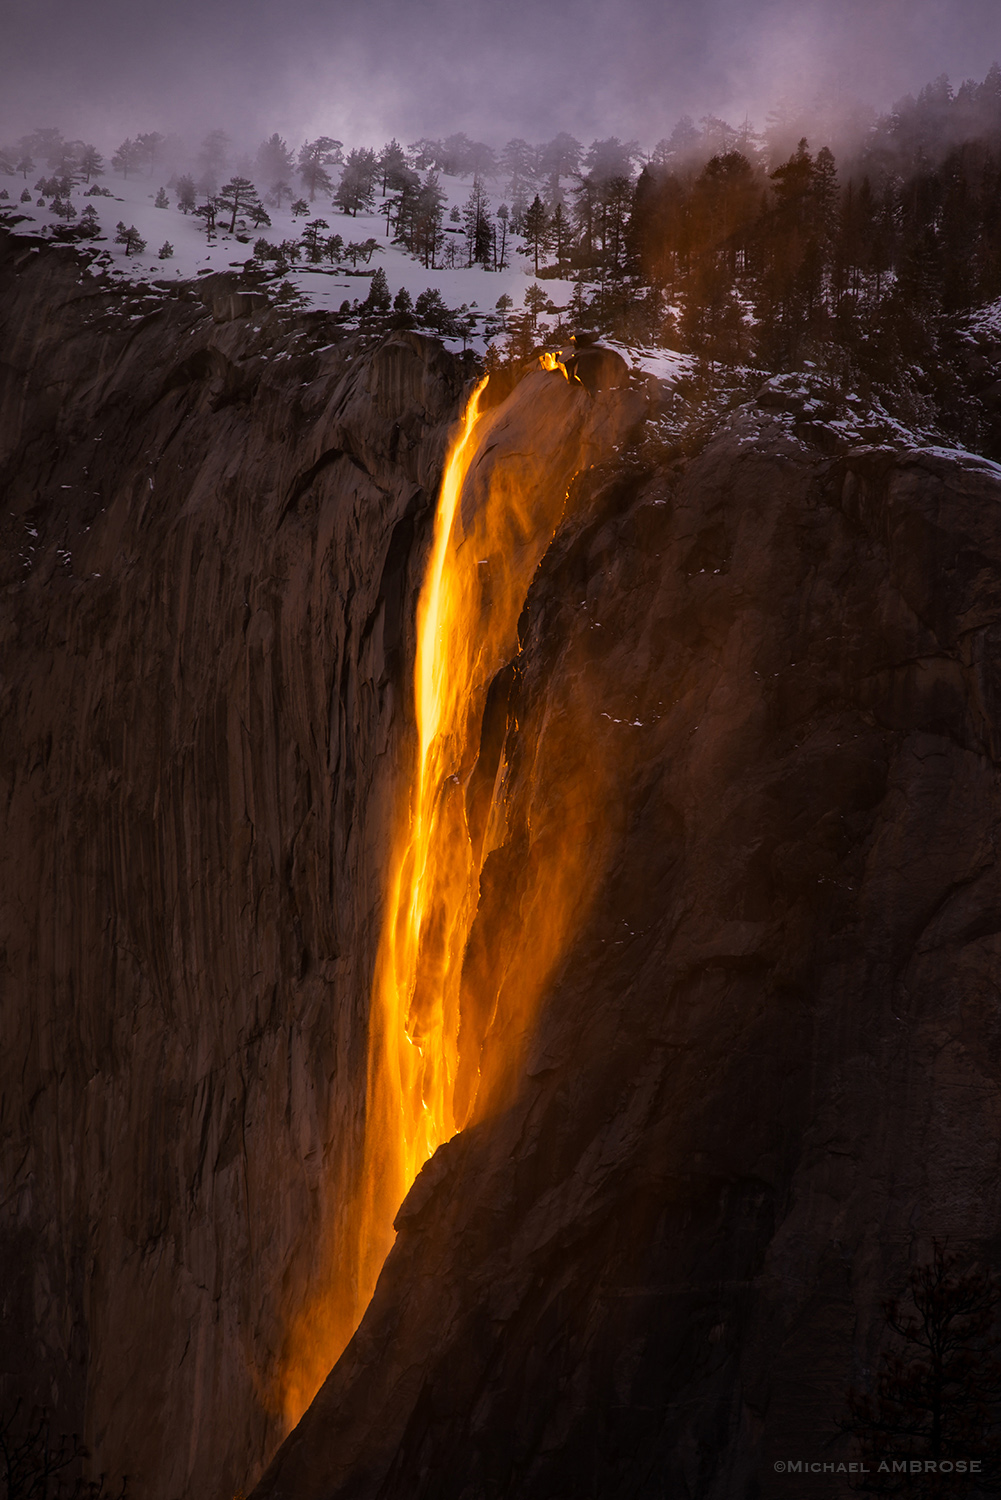 A photograph of the famous Horsetail Fall in Yosemite National Park, a waterfall flowing off El Capitan seasonally.